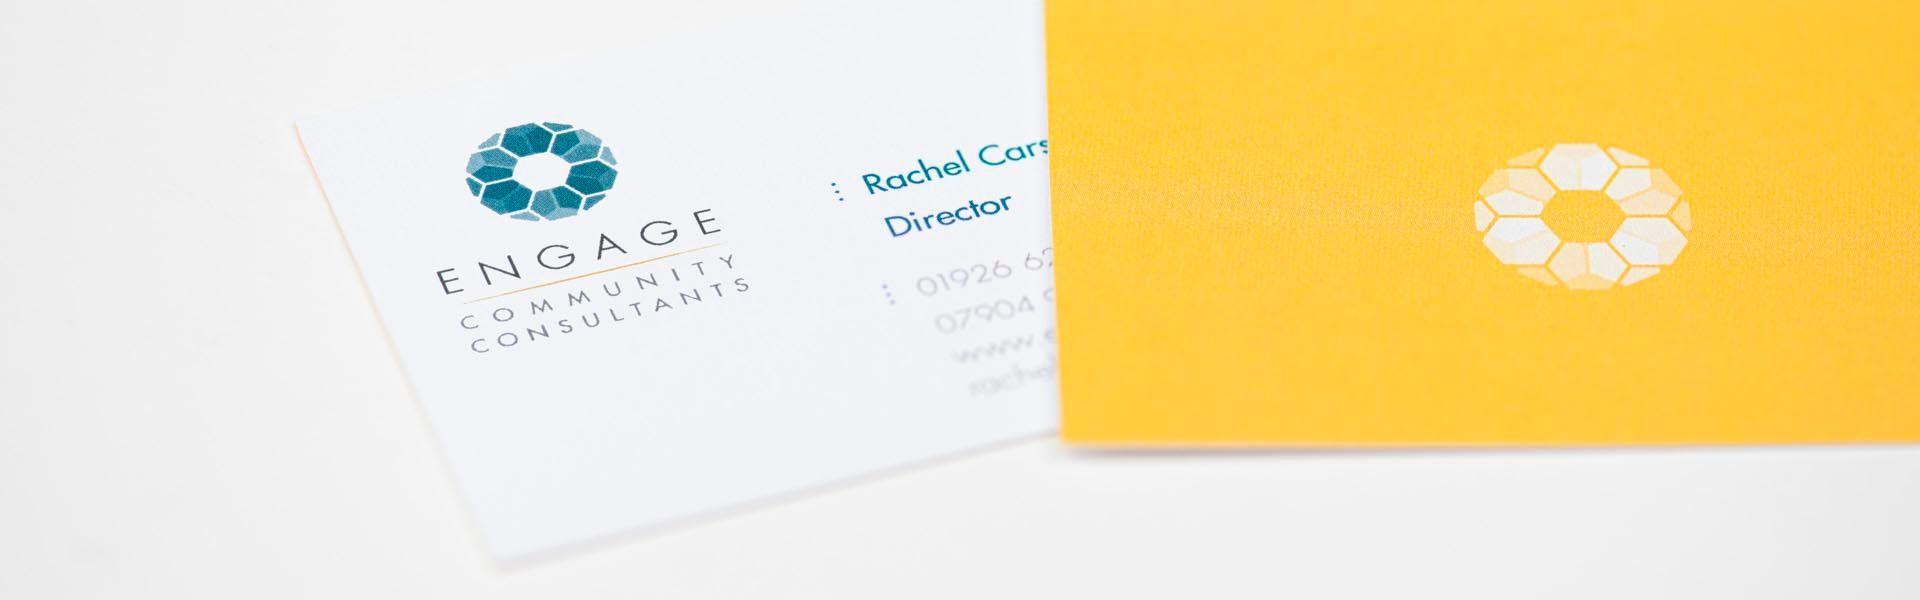 a business card for engage community consultants sits next to a yellow envelope